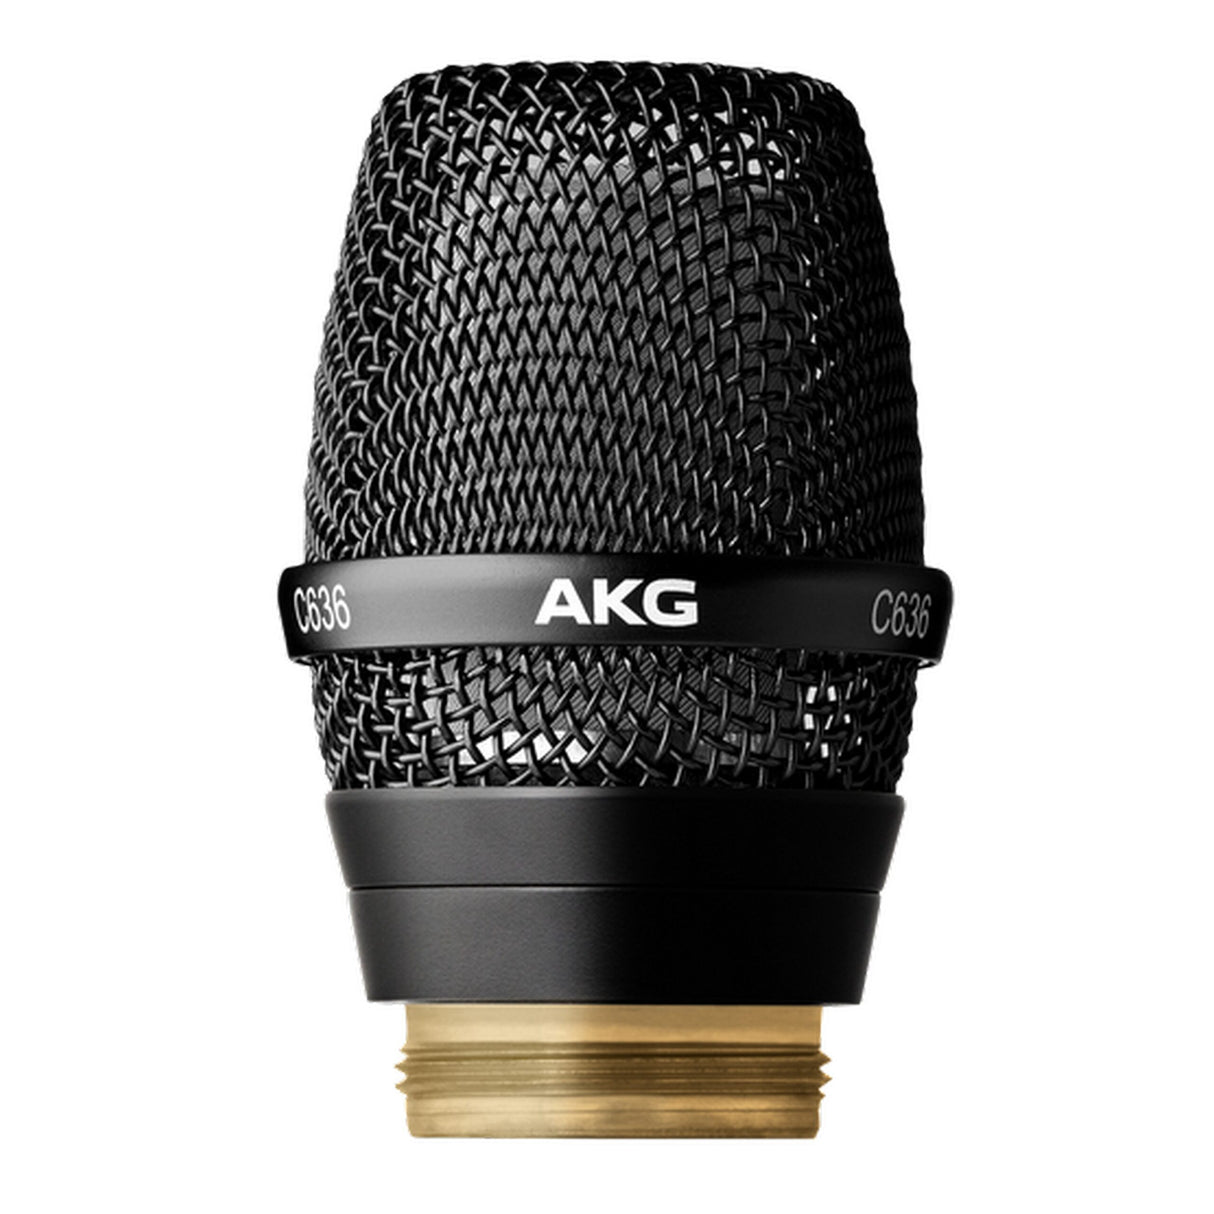 AKG C636 WL1 Master Cardioid Reference Condenser Vocal Microphone Head